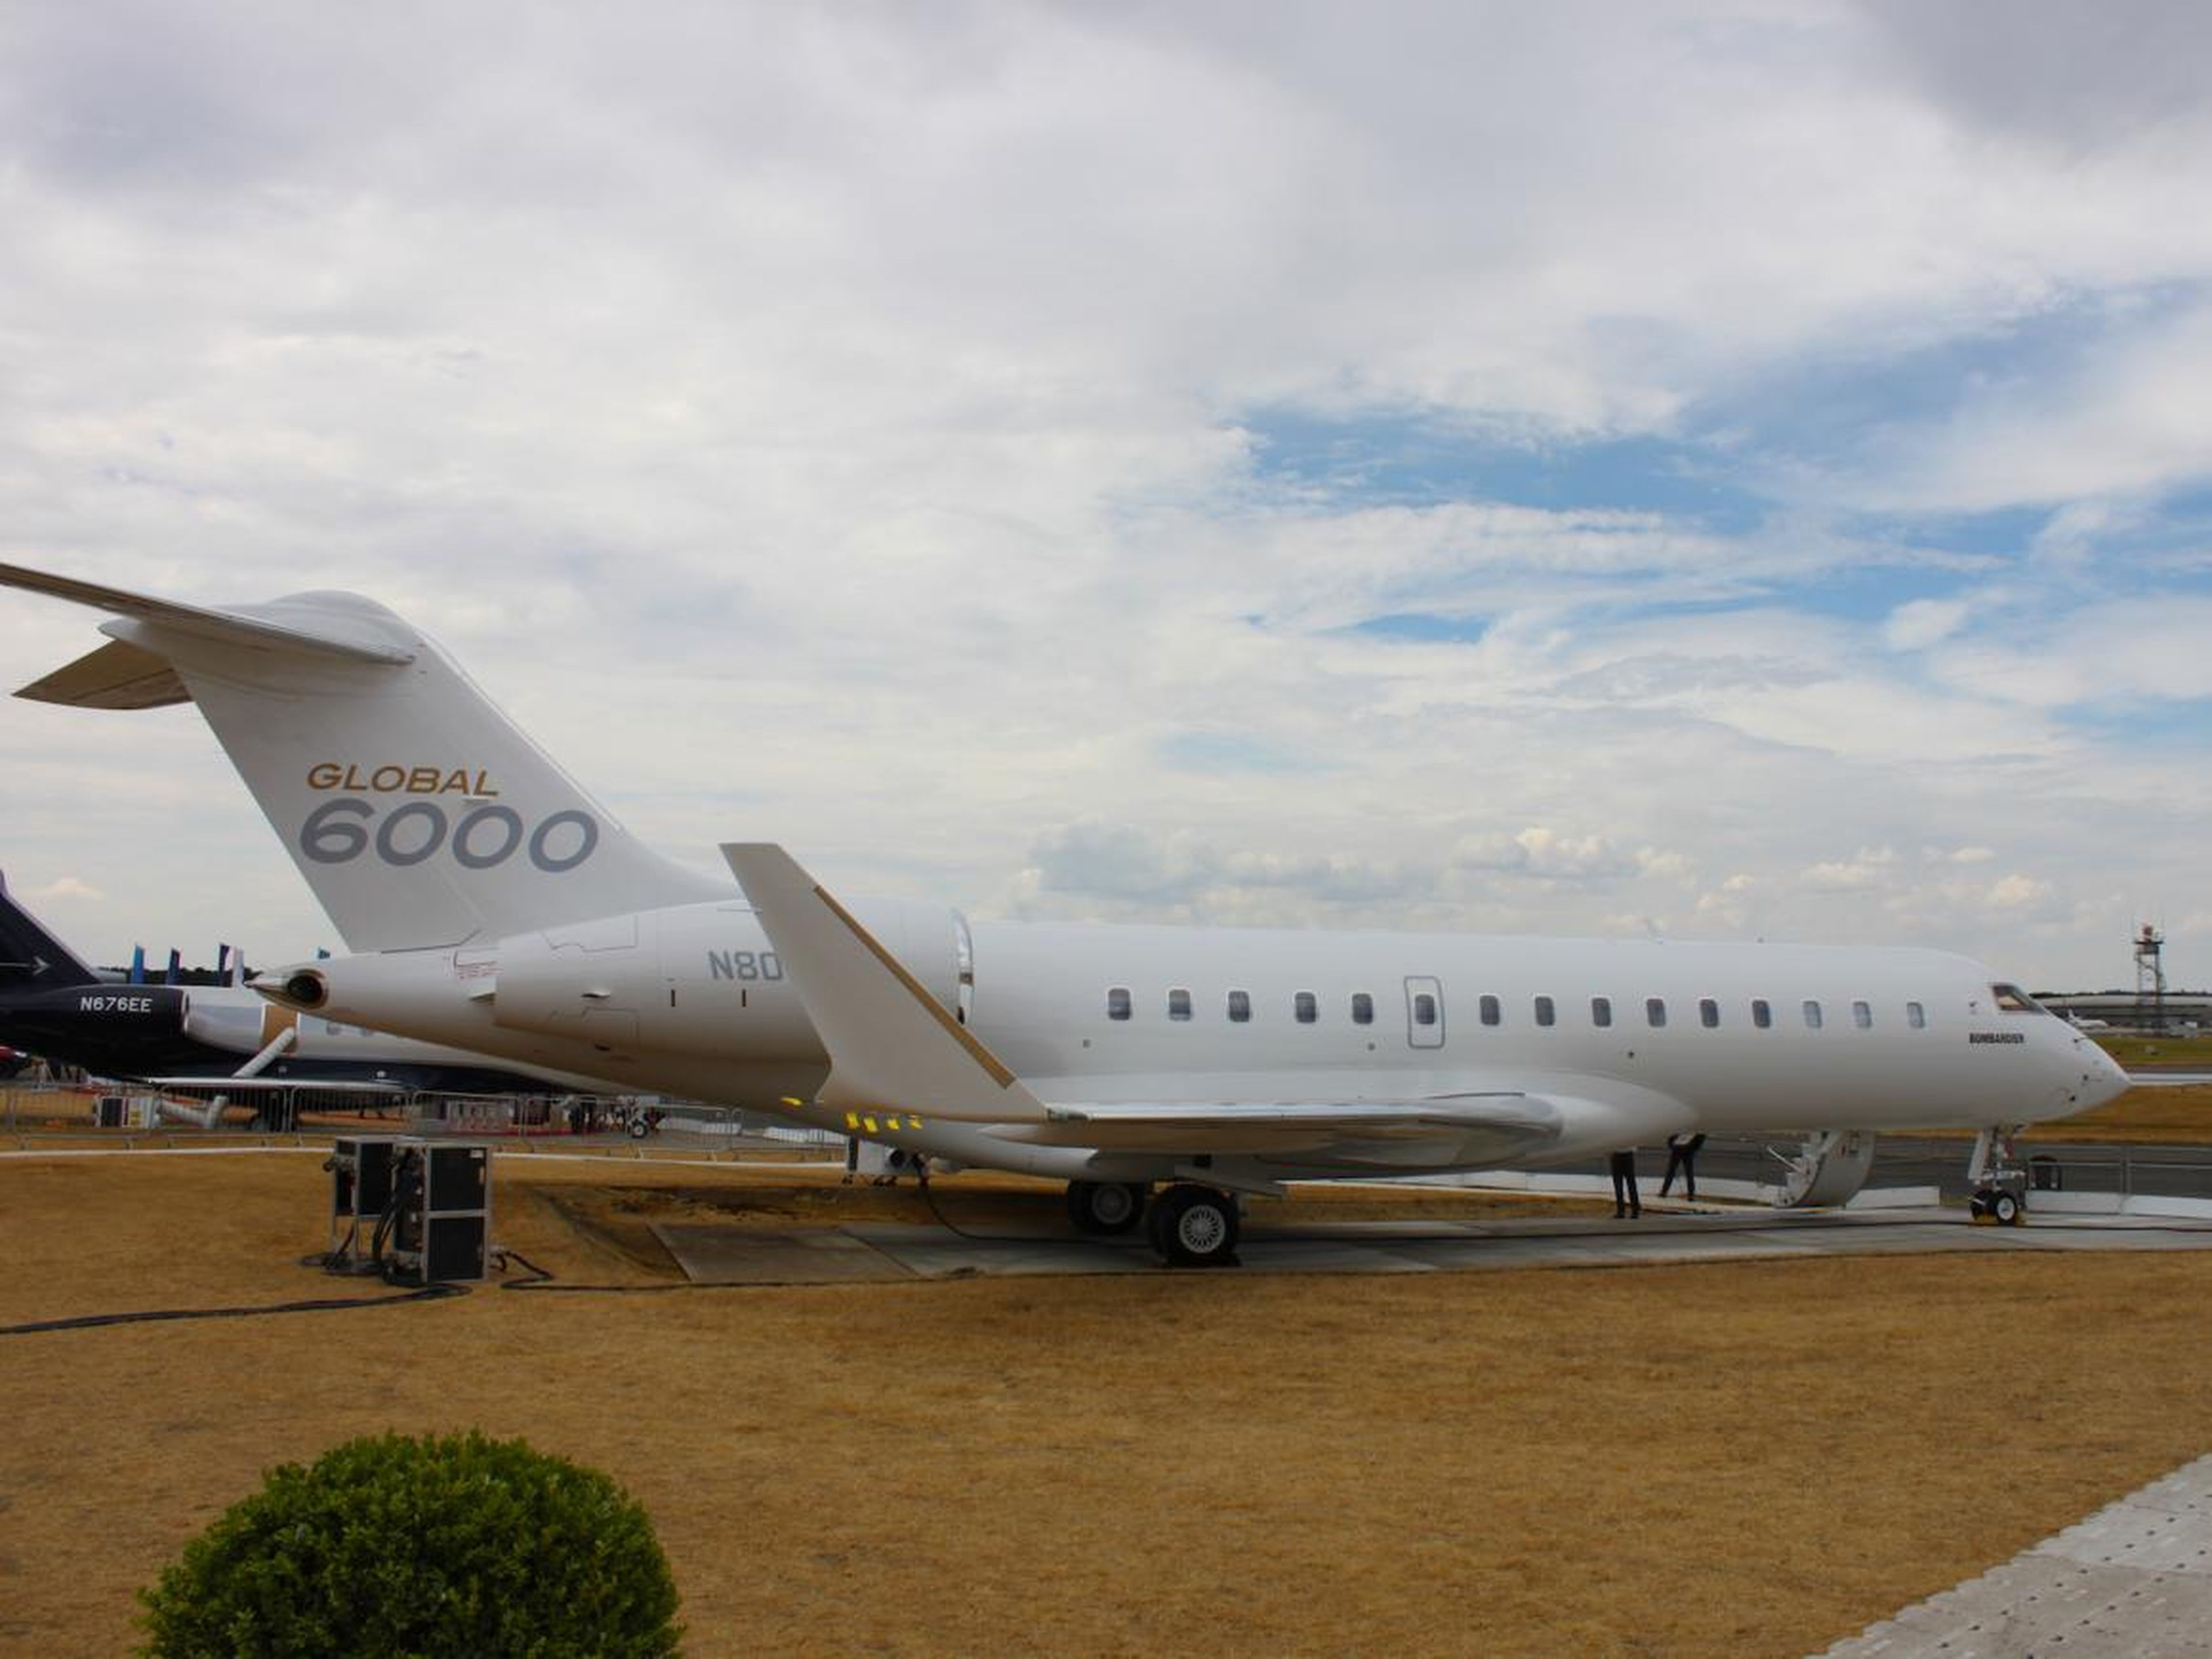 Before the arrival of the Global 7500, the $62 million Global 6000 served as the Canadian jet maker's flagship product.